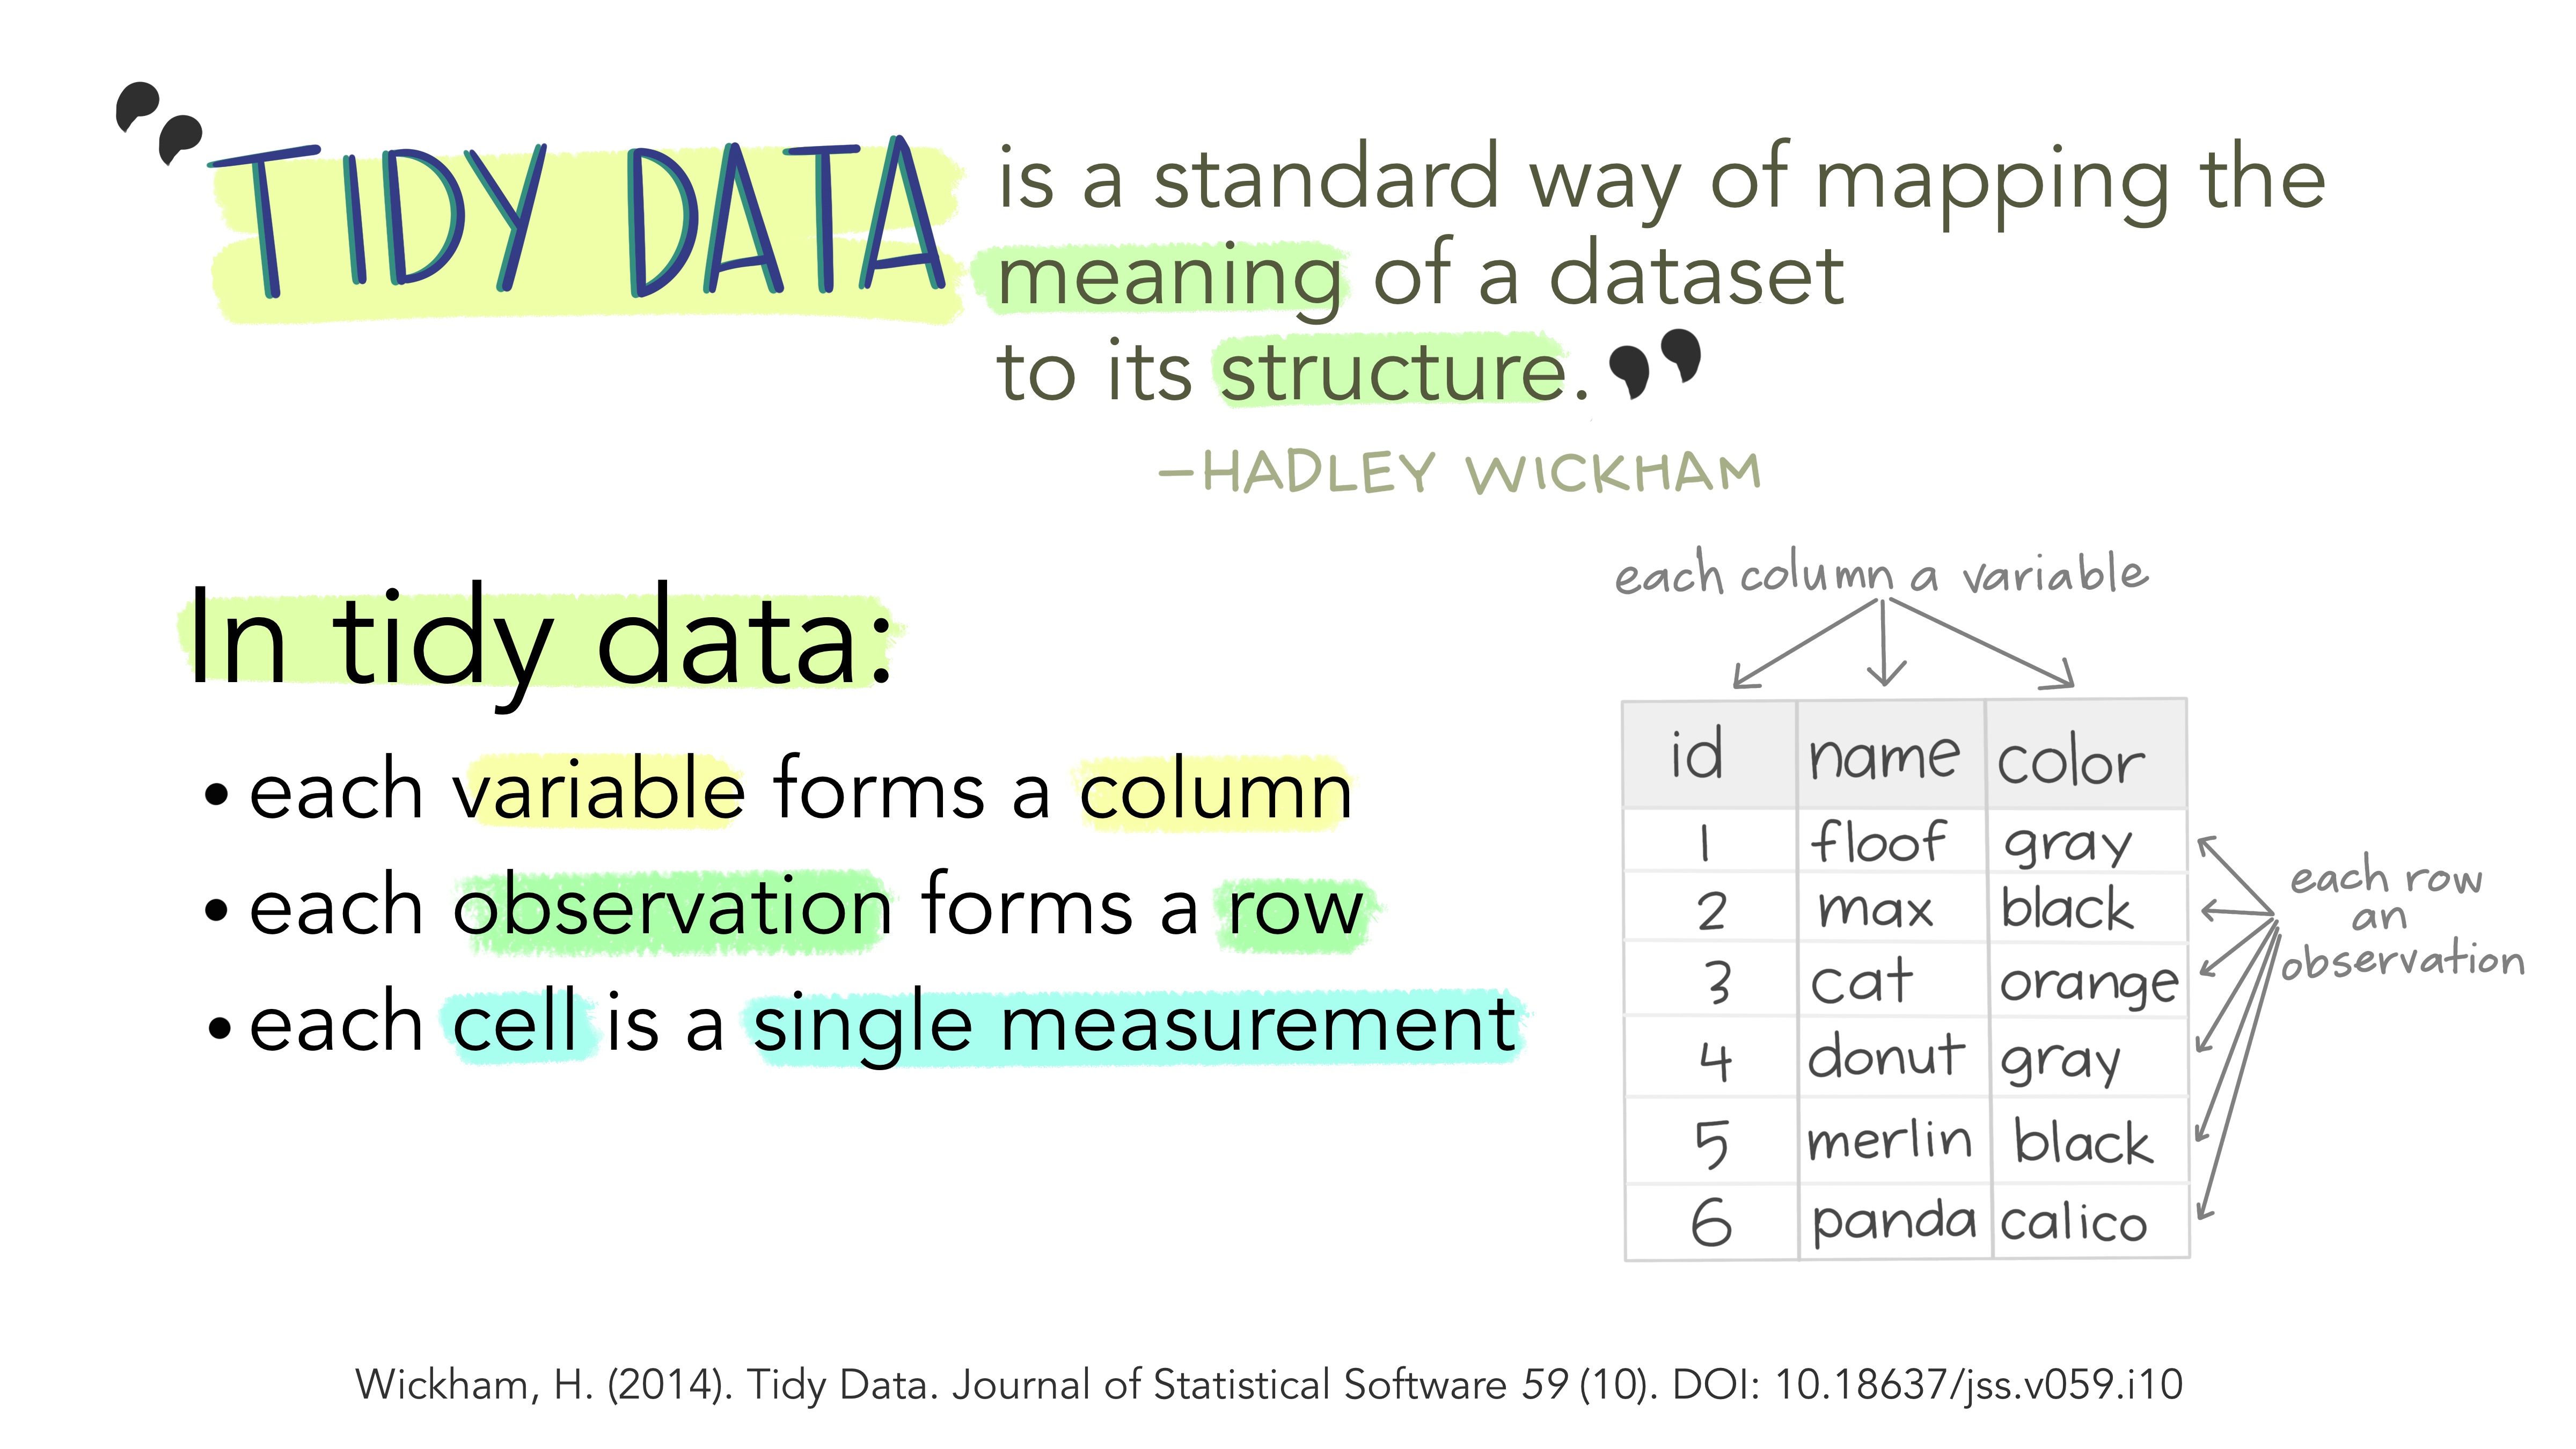 In tidy data: each variable forms a column, each observation forms a row, each cell is a single measurement.